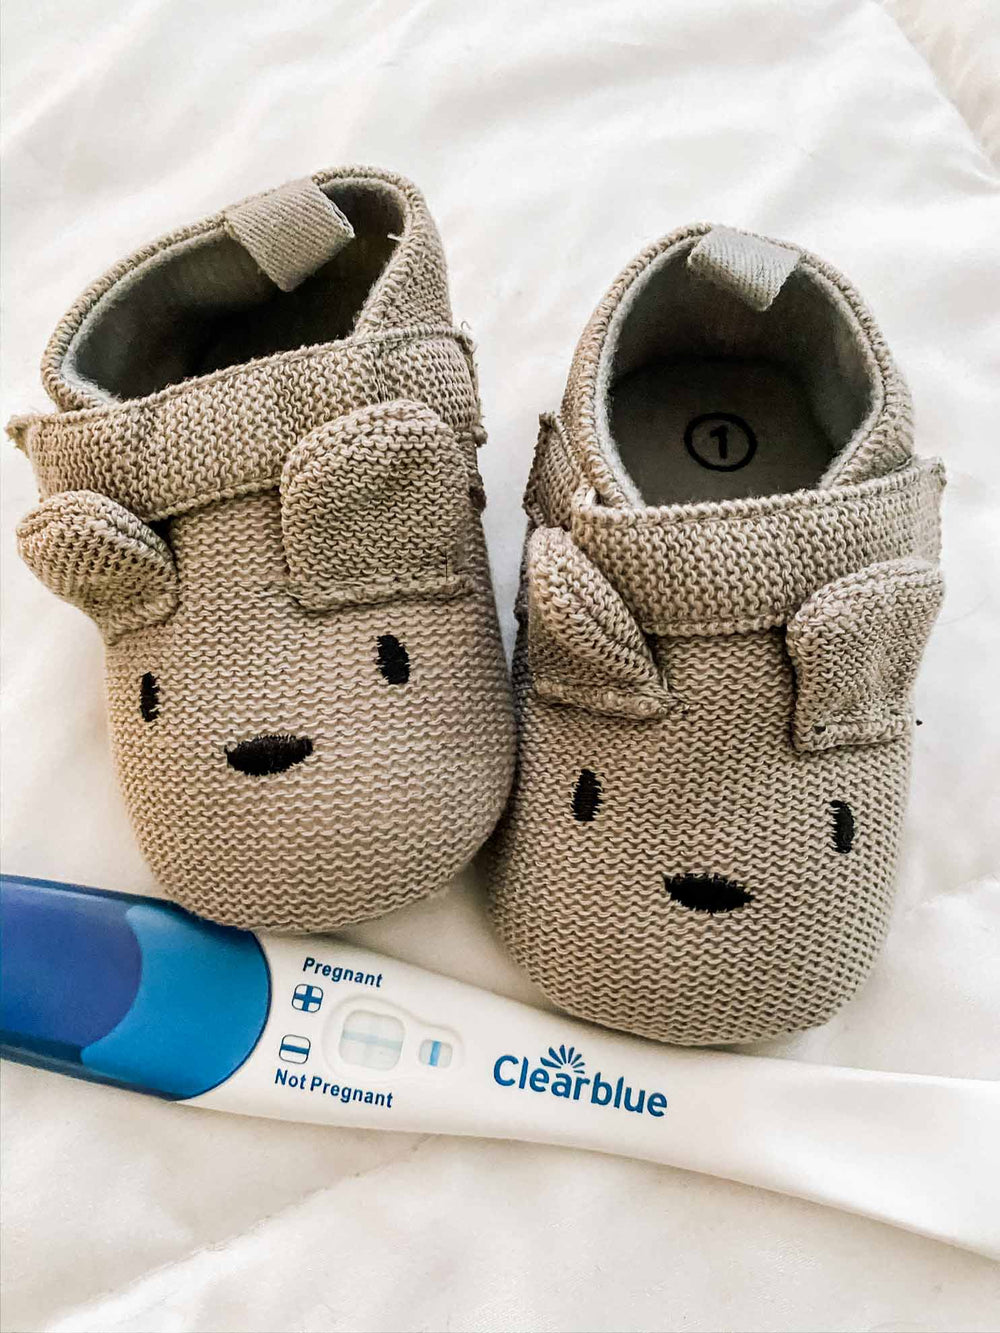 Baby shoes and positive pregnancy